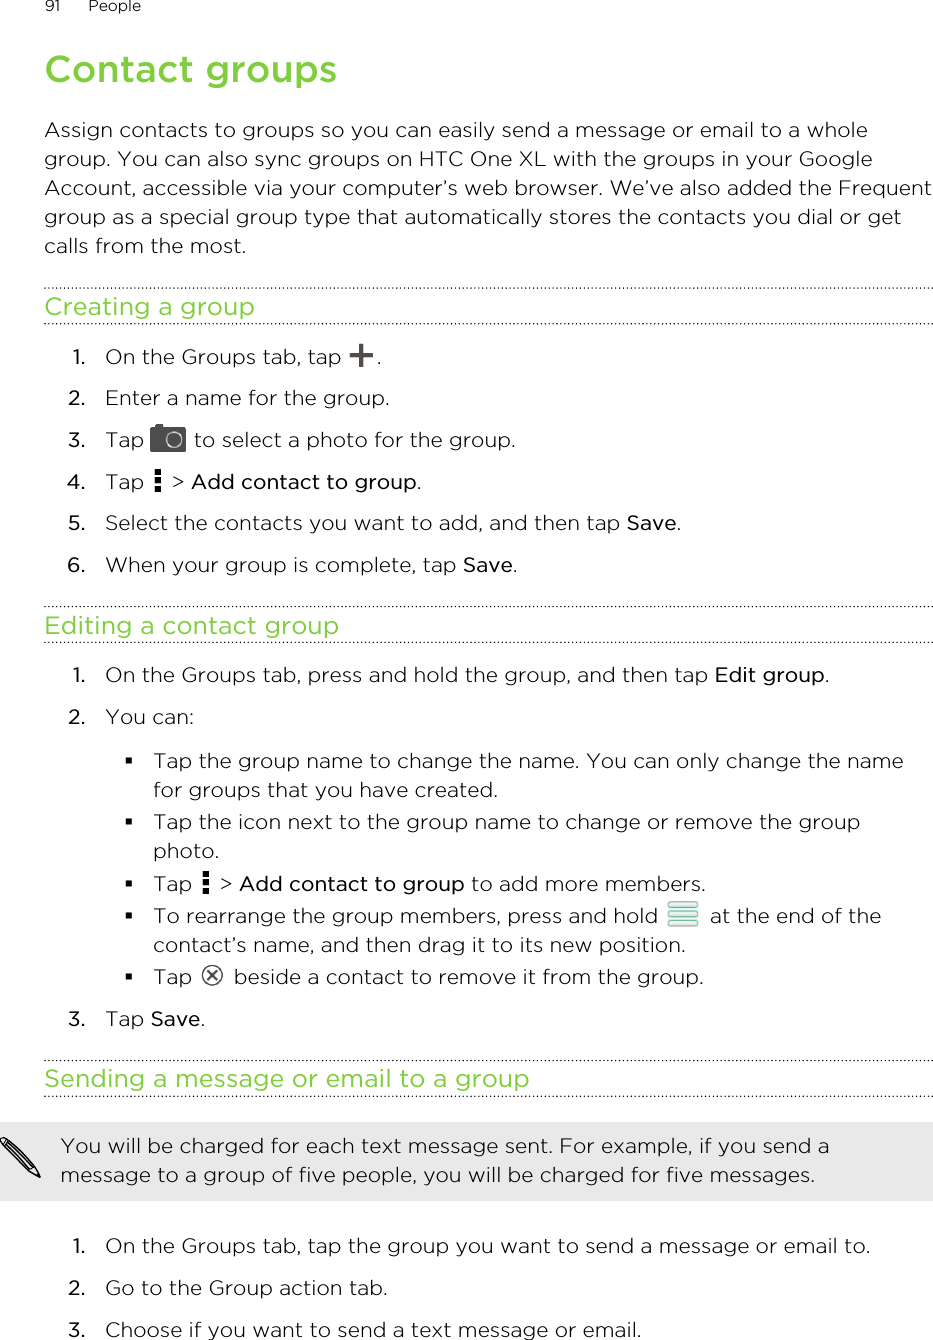 Contact groupsAssign contacts to groups so you can easily send a message or email to a wholegroup. You can also sync groups on HTC One XL with the groups in your GoogleAccount, accessible via your computer’s web browser. We’ve also added the Frequentgroup as a special group type that automatically stores the contacts you dial or getcalls from the most.Creating a group1. On the Groups tab, tap  .2. Enter a name for the group.3. Tap   to select a photo for the group.4. Tap   &gt; Add contact to group.5. Select the contacts you want to add, and then tap Save.6. When your group is complete, tap Save.Editing a contact group1. On the Groups tab, press and hold the group, and then tap Edit group.2. You can:§Tap the group name to change the name. You can only change the namefor groups that you have created.§Tap the icon next to the group name to change or remove the groupphoto.§Tap   &gt; Add contact to group to add more members.§To rearrange the group members, press and hold   at the end of thecontact’s name, and then drag it to its new position.§Tap   beside a contact to remove it from the group.3. Tap Save.Sending a message or email to a groupYou will be charged for each text message sent. For example, if you send amessage to a group of five people, you will be charged for five messages.1. On the Groups tab, tap the group you want to send a message or email to.2. Go to the Group action tab.3. Choose if you want to send a text message or email.91 People